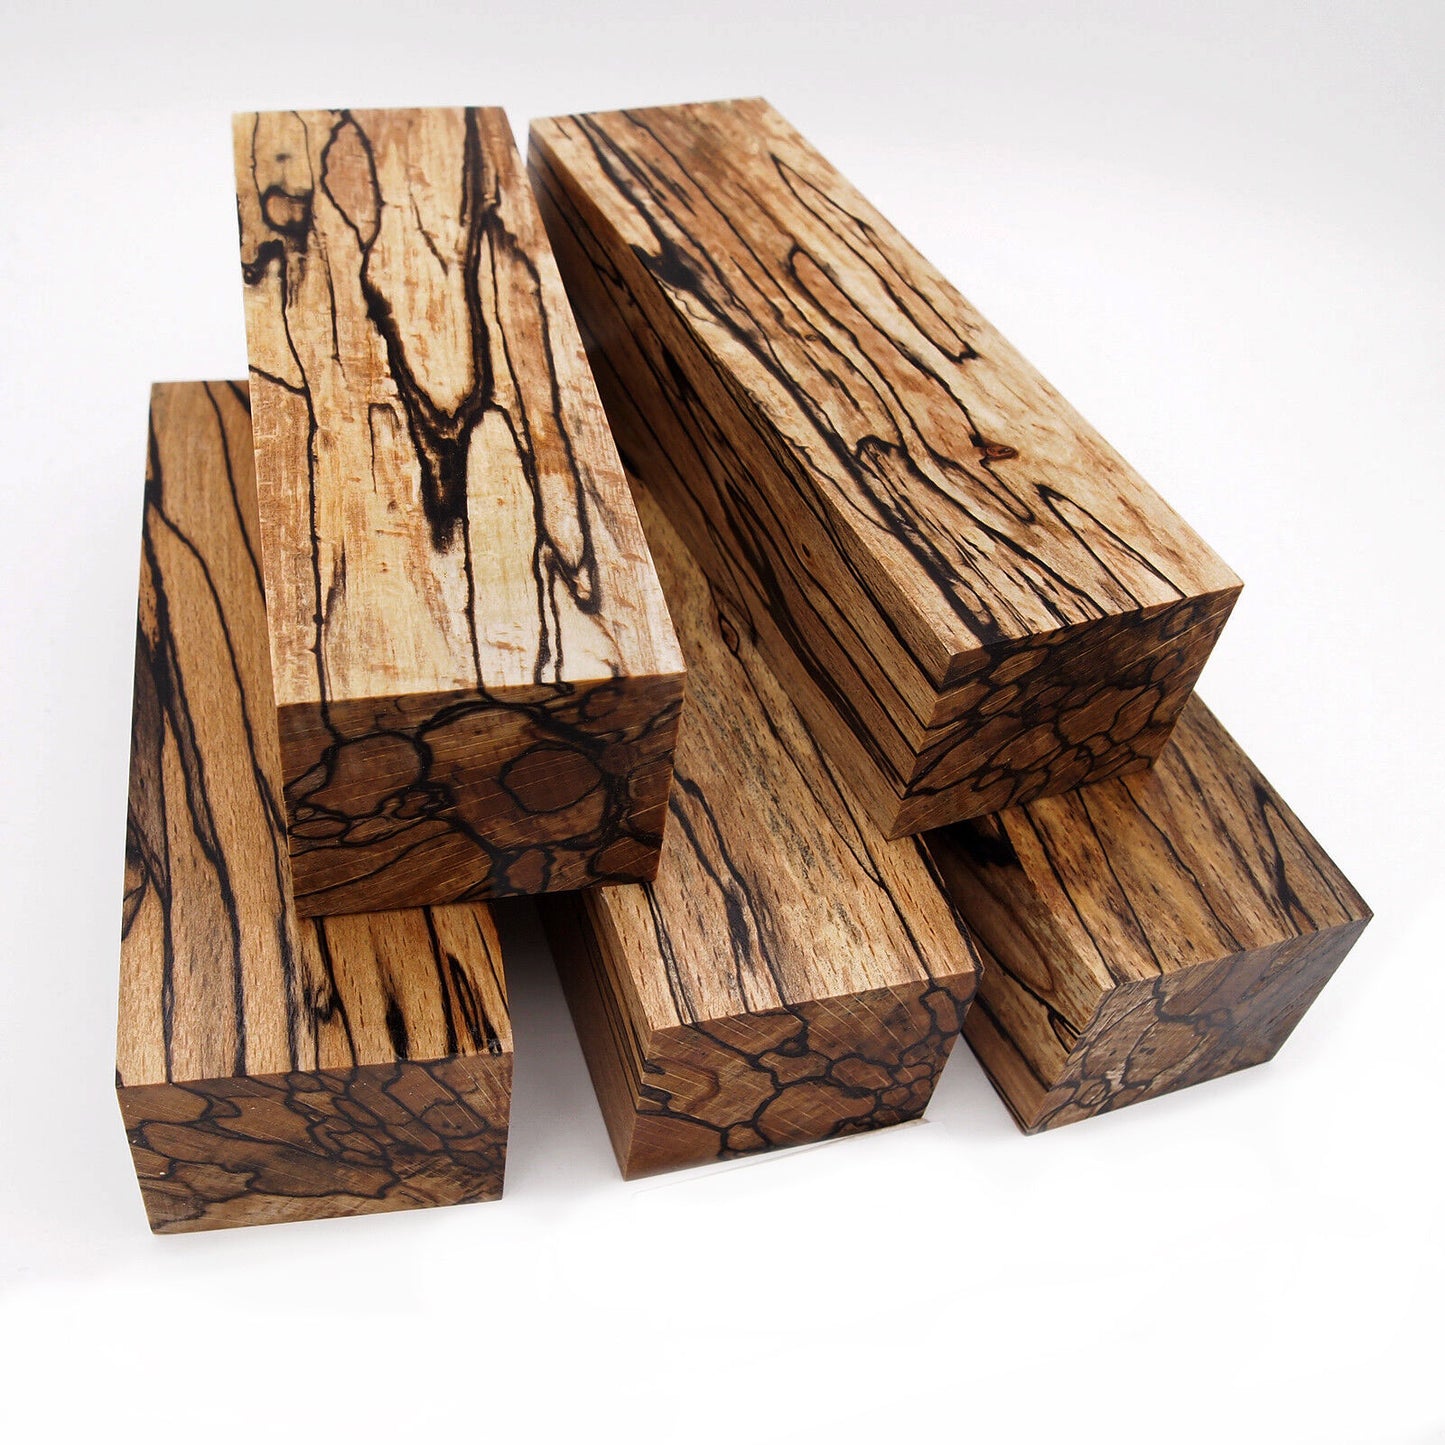 SPALTED BEECH STABILIZED WOOD KNIFE BLOCK 01-0013